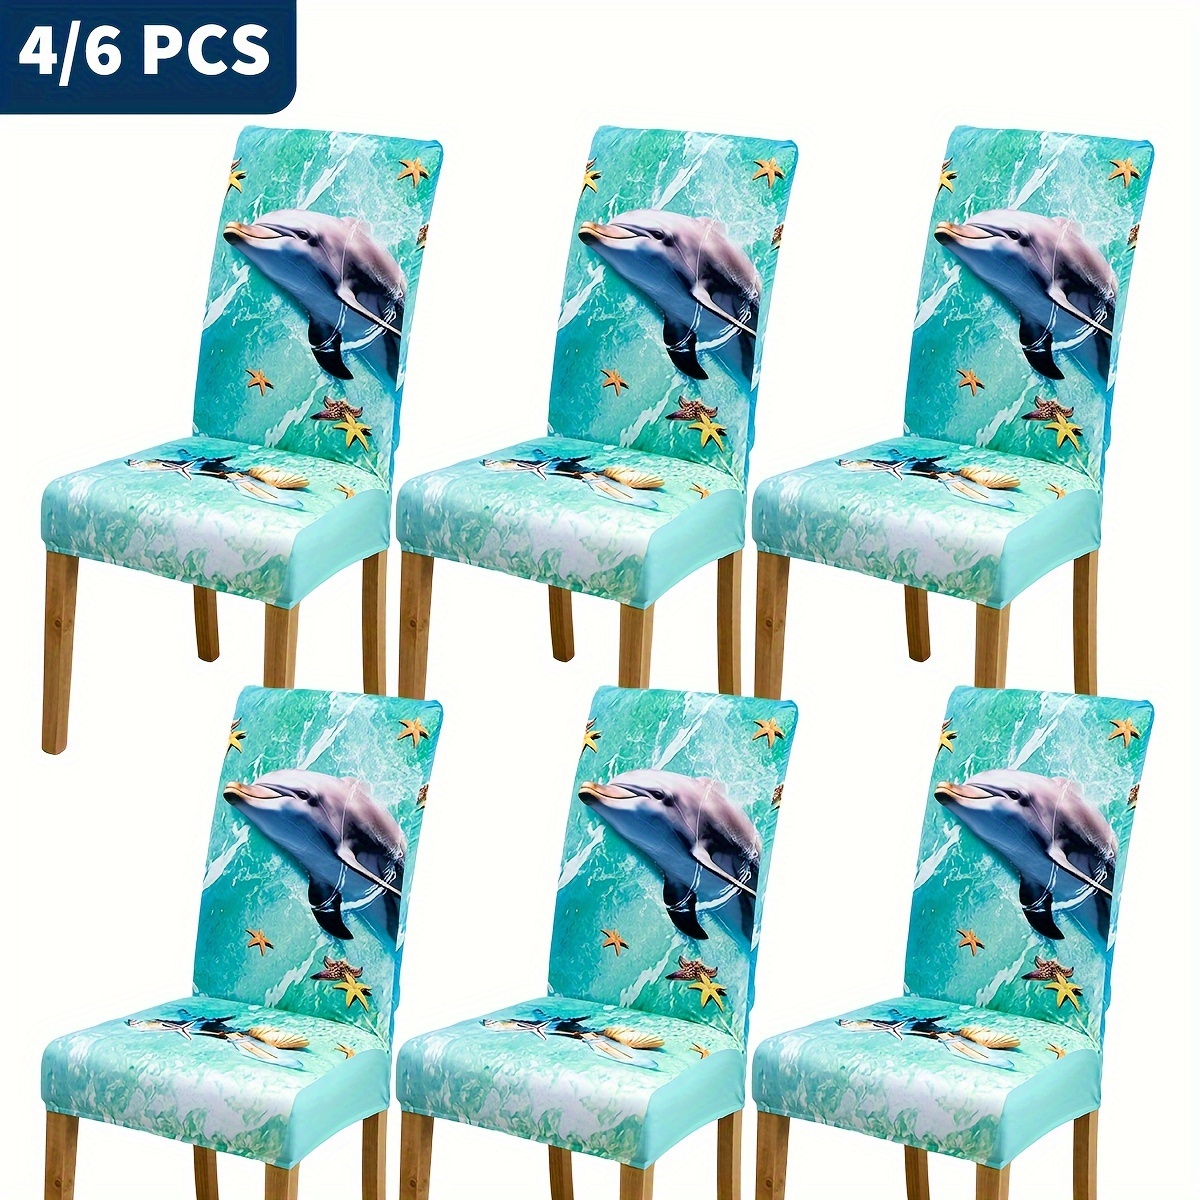 

4/6pcs Starfish Dolphin Pattern Chair Slipcovers, Dining Chair Cover, Furniture Protective Cover, For Dining Room Living Room Office Home Decor